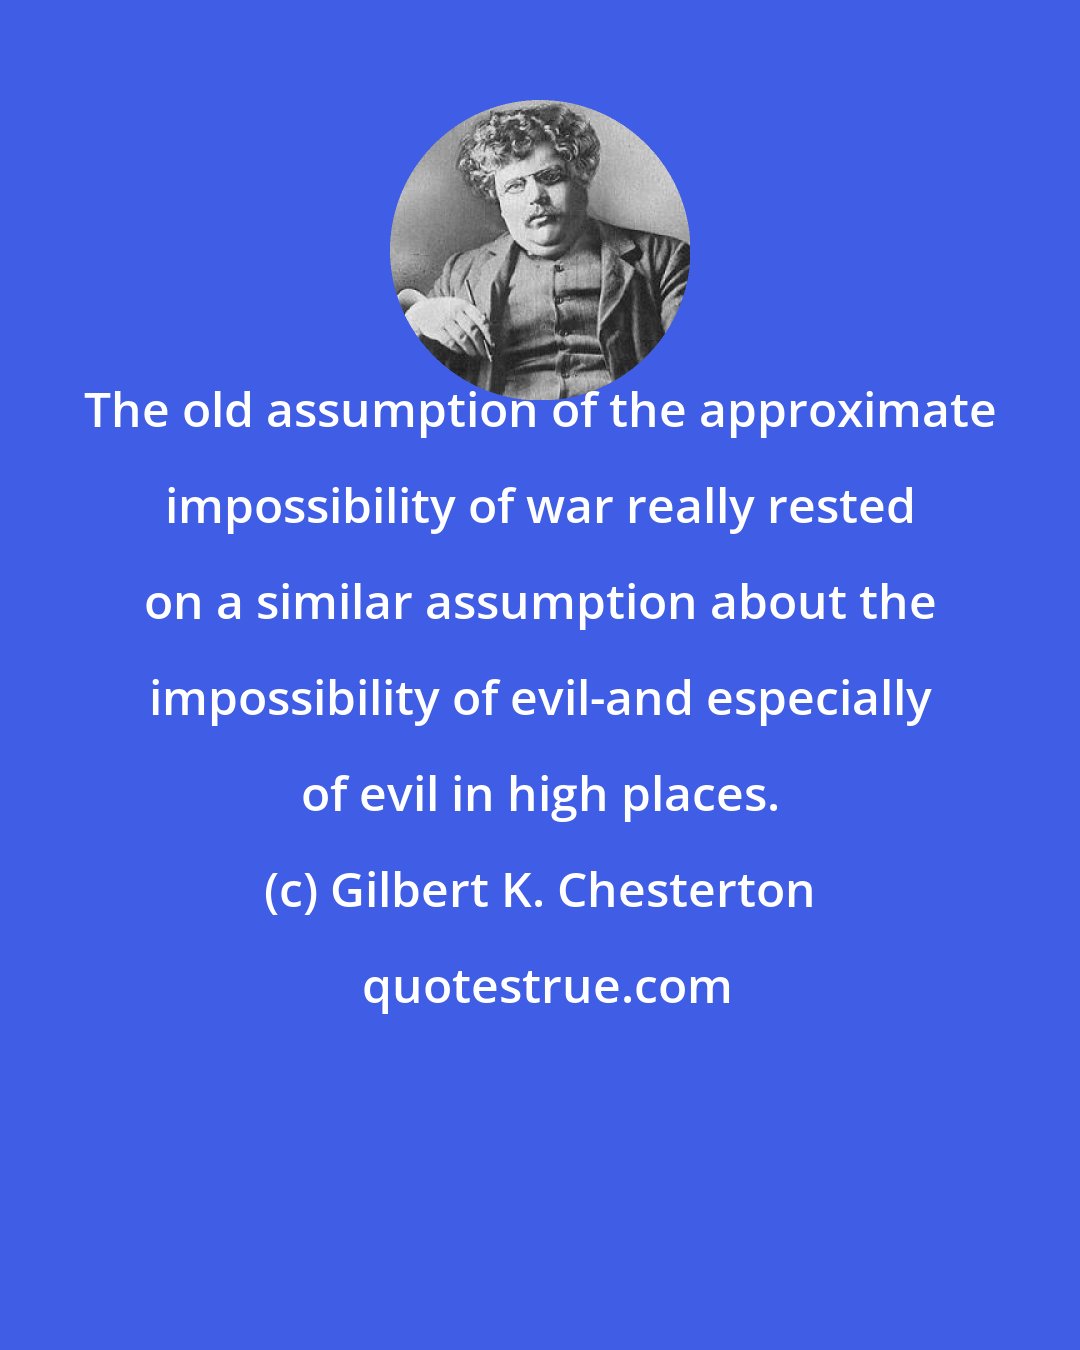 Gilbert K. Chesterton: The old assumption of the approximate impossibility of war really rested on a similar assumption about the impossibility of evil-and especially of evil in high places.